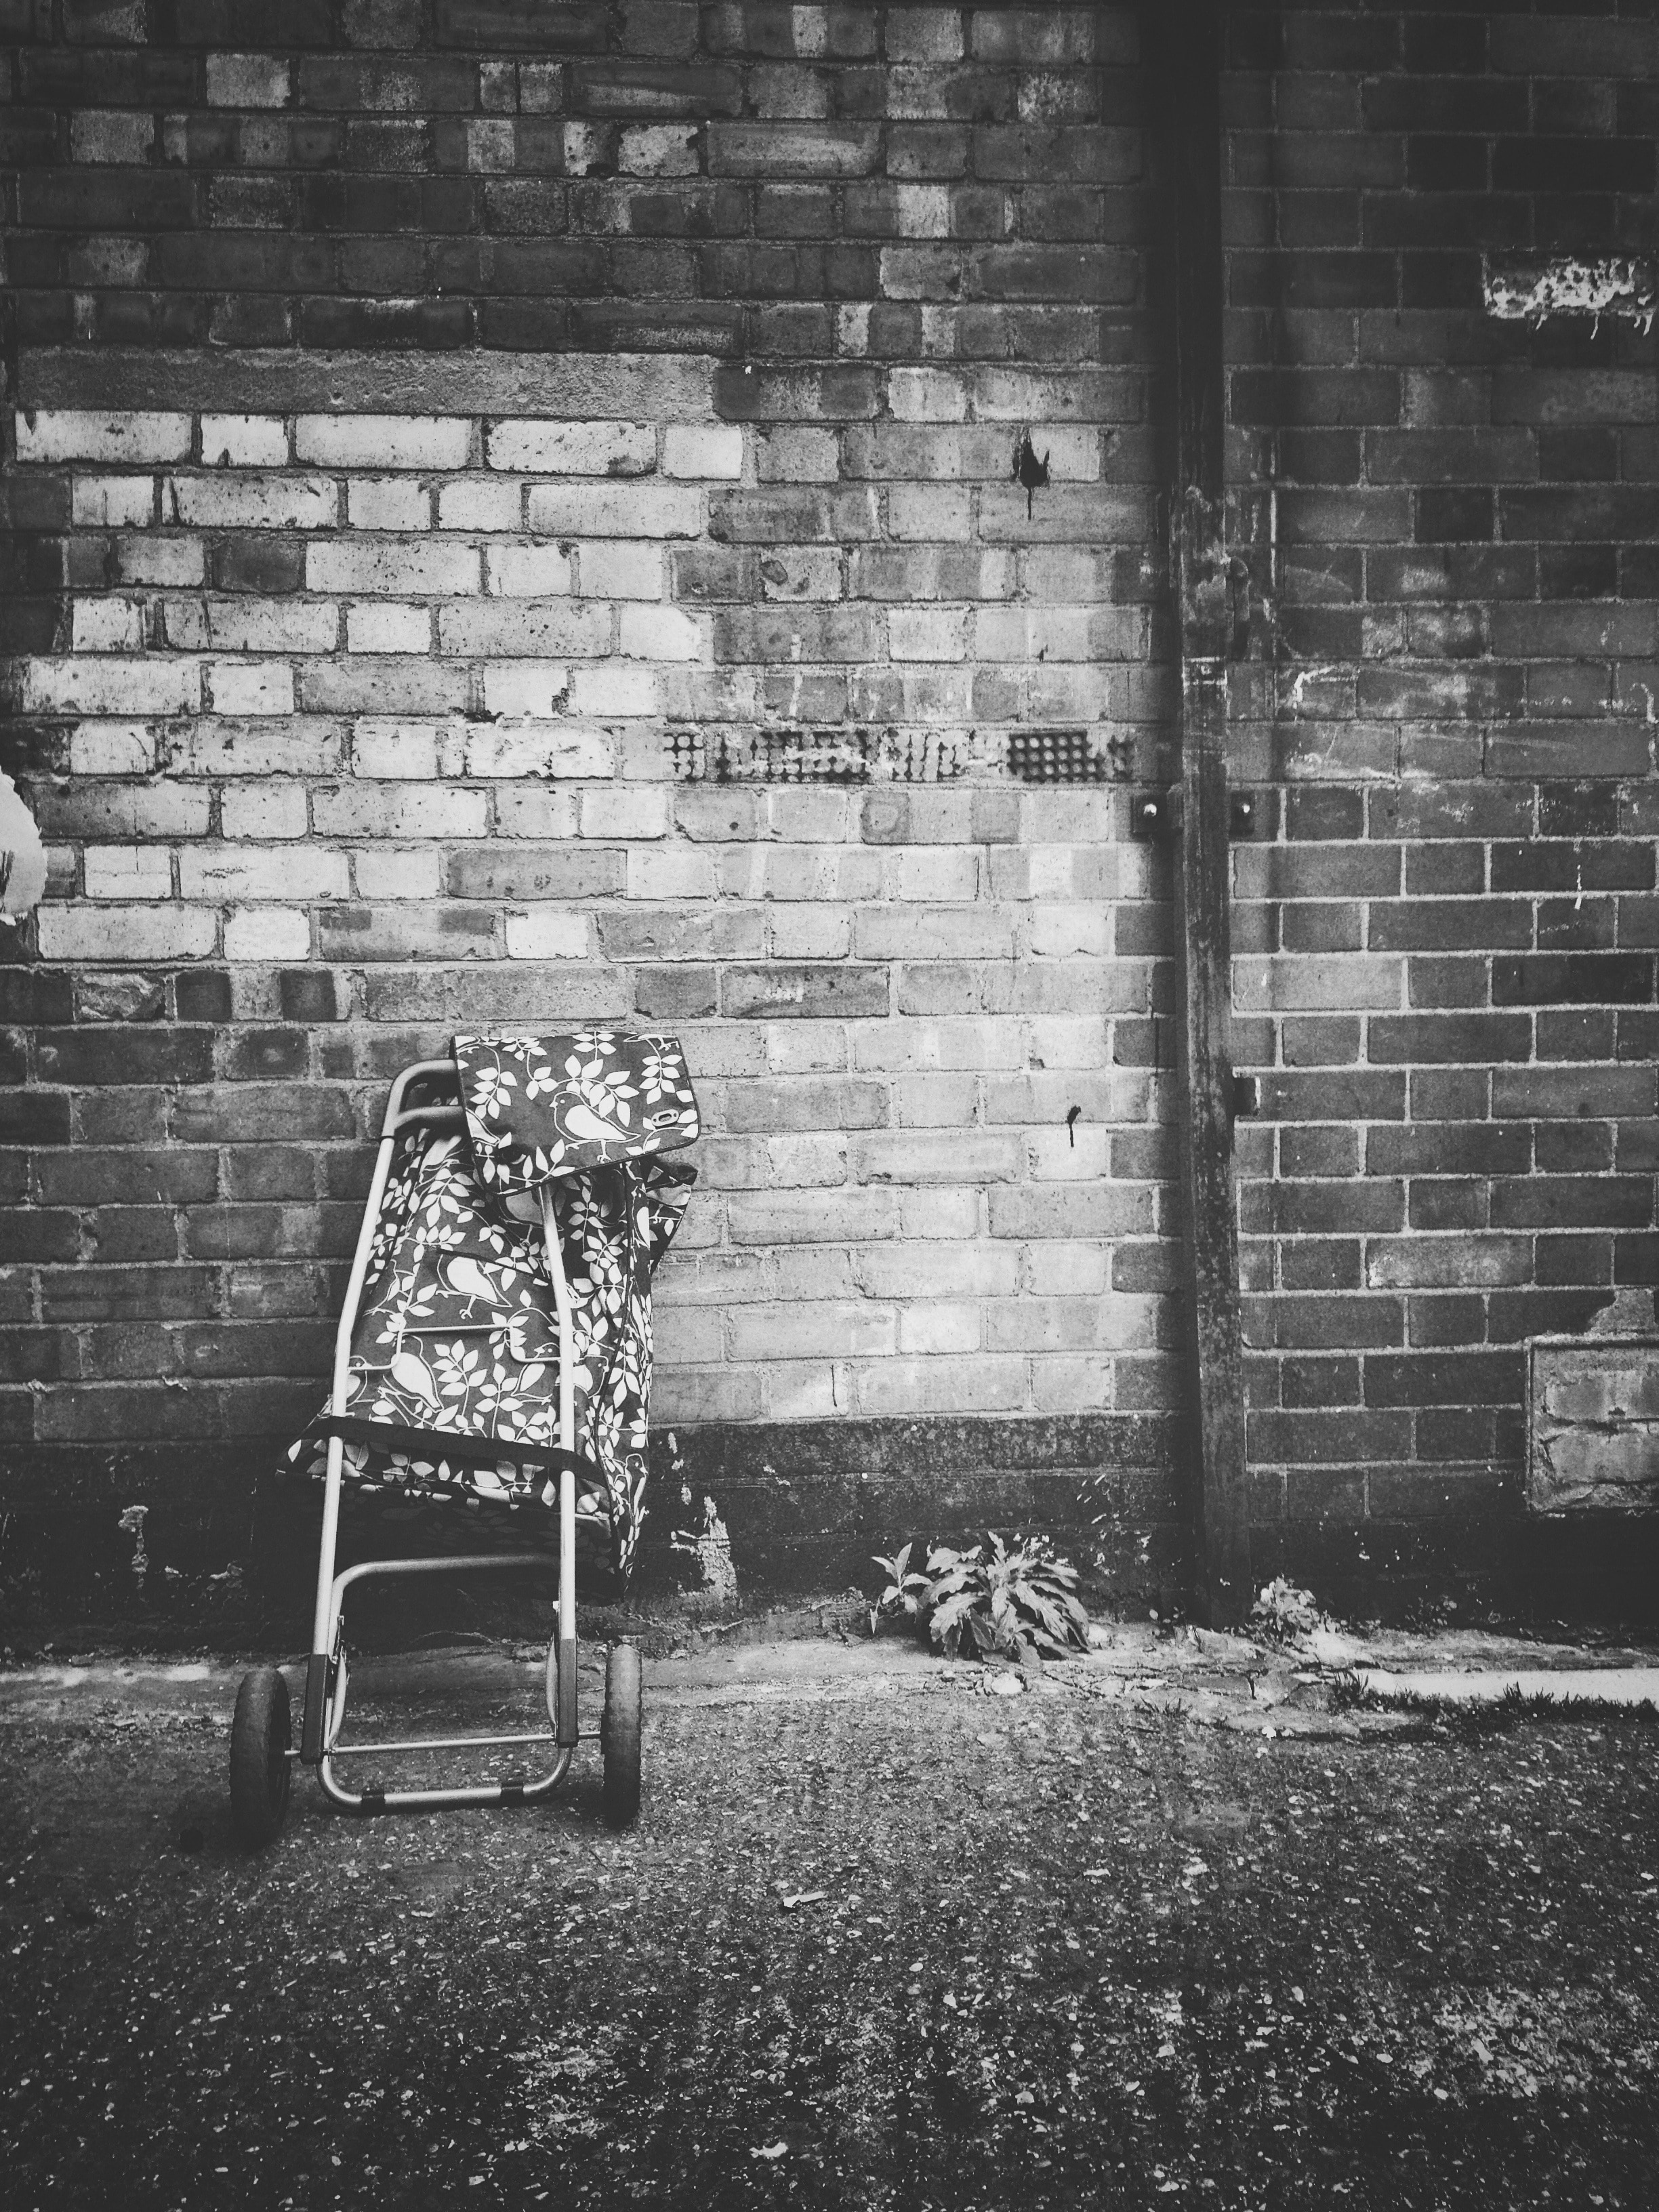 baby's lightweight stroller in front of brick wall in grayscale photography